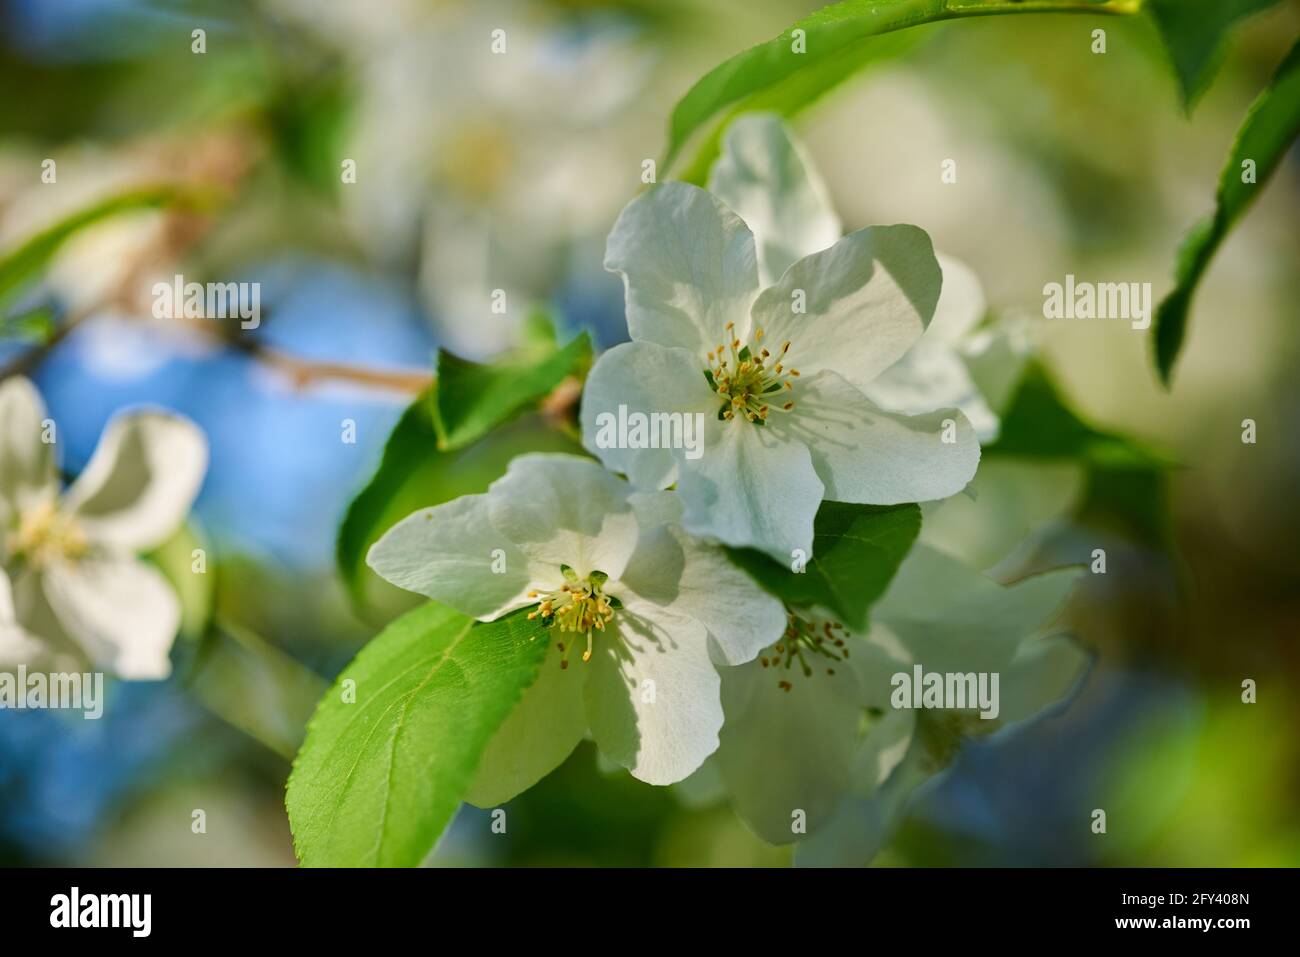 White blossoming apple flowers with green leaves Stock Photo